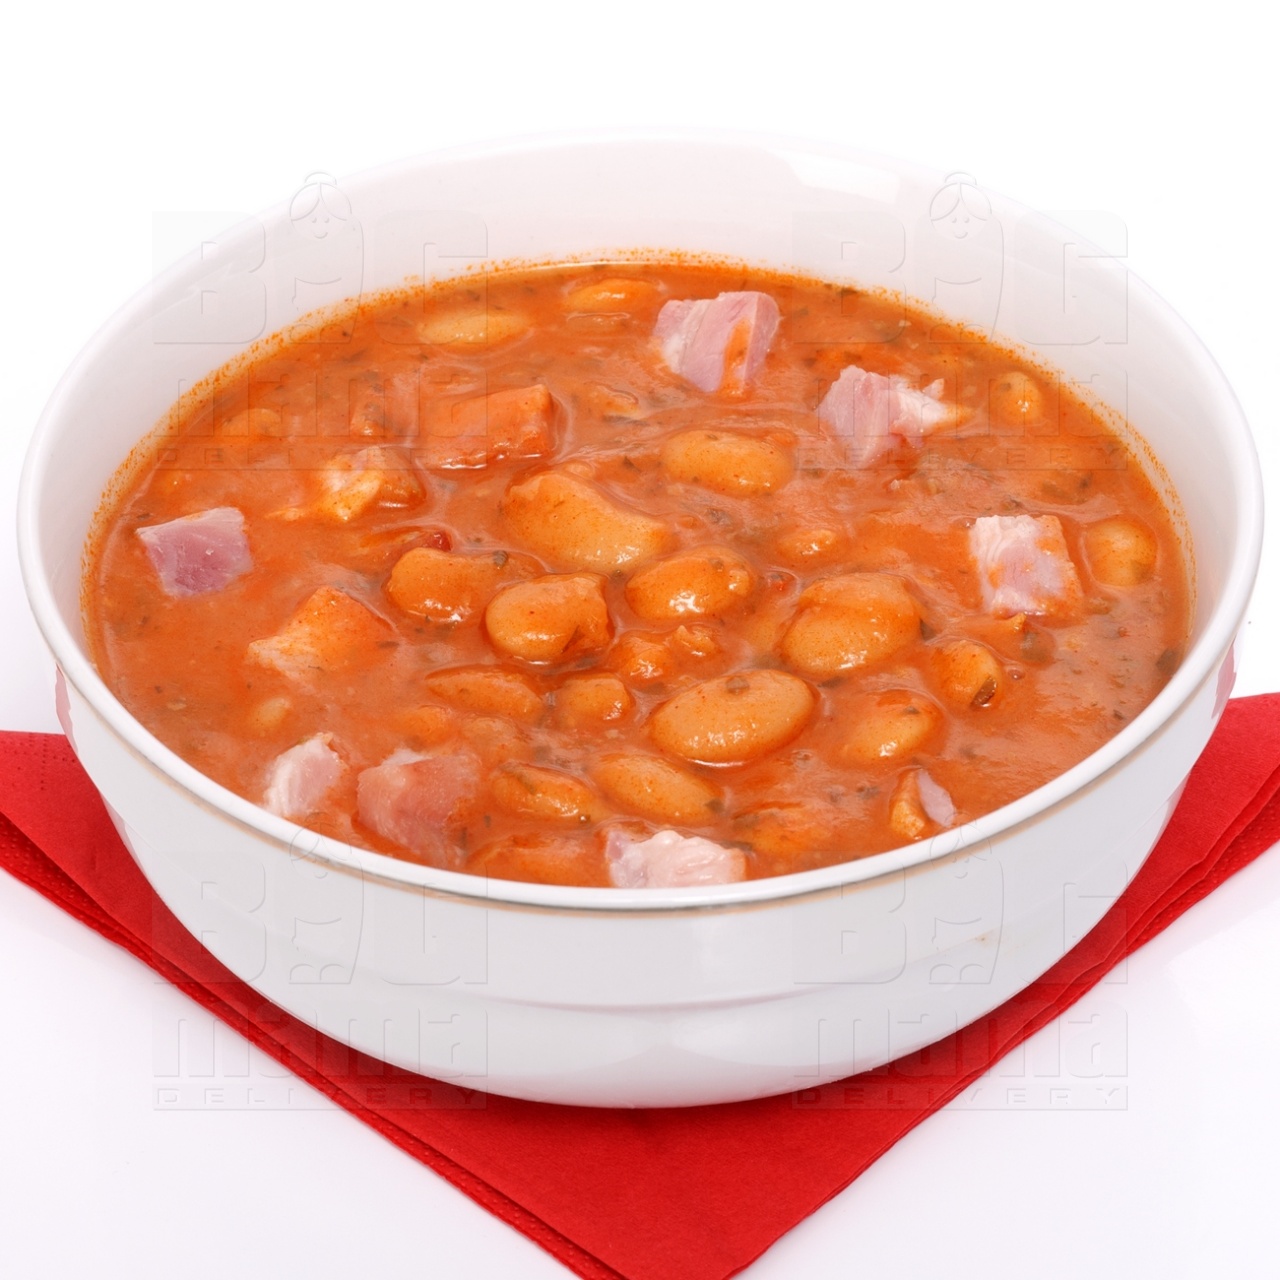 Product #2 image - Bean soup with smoked ham